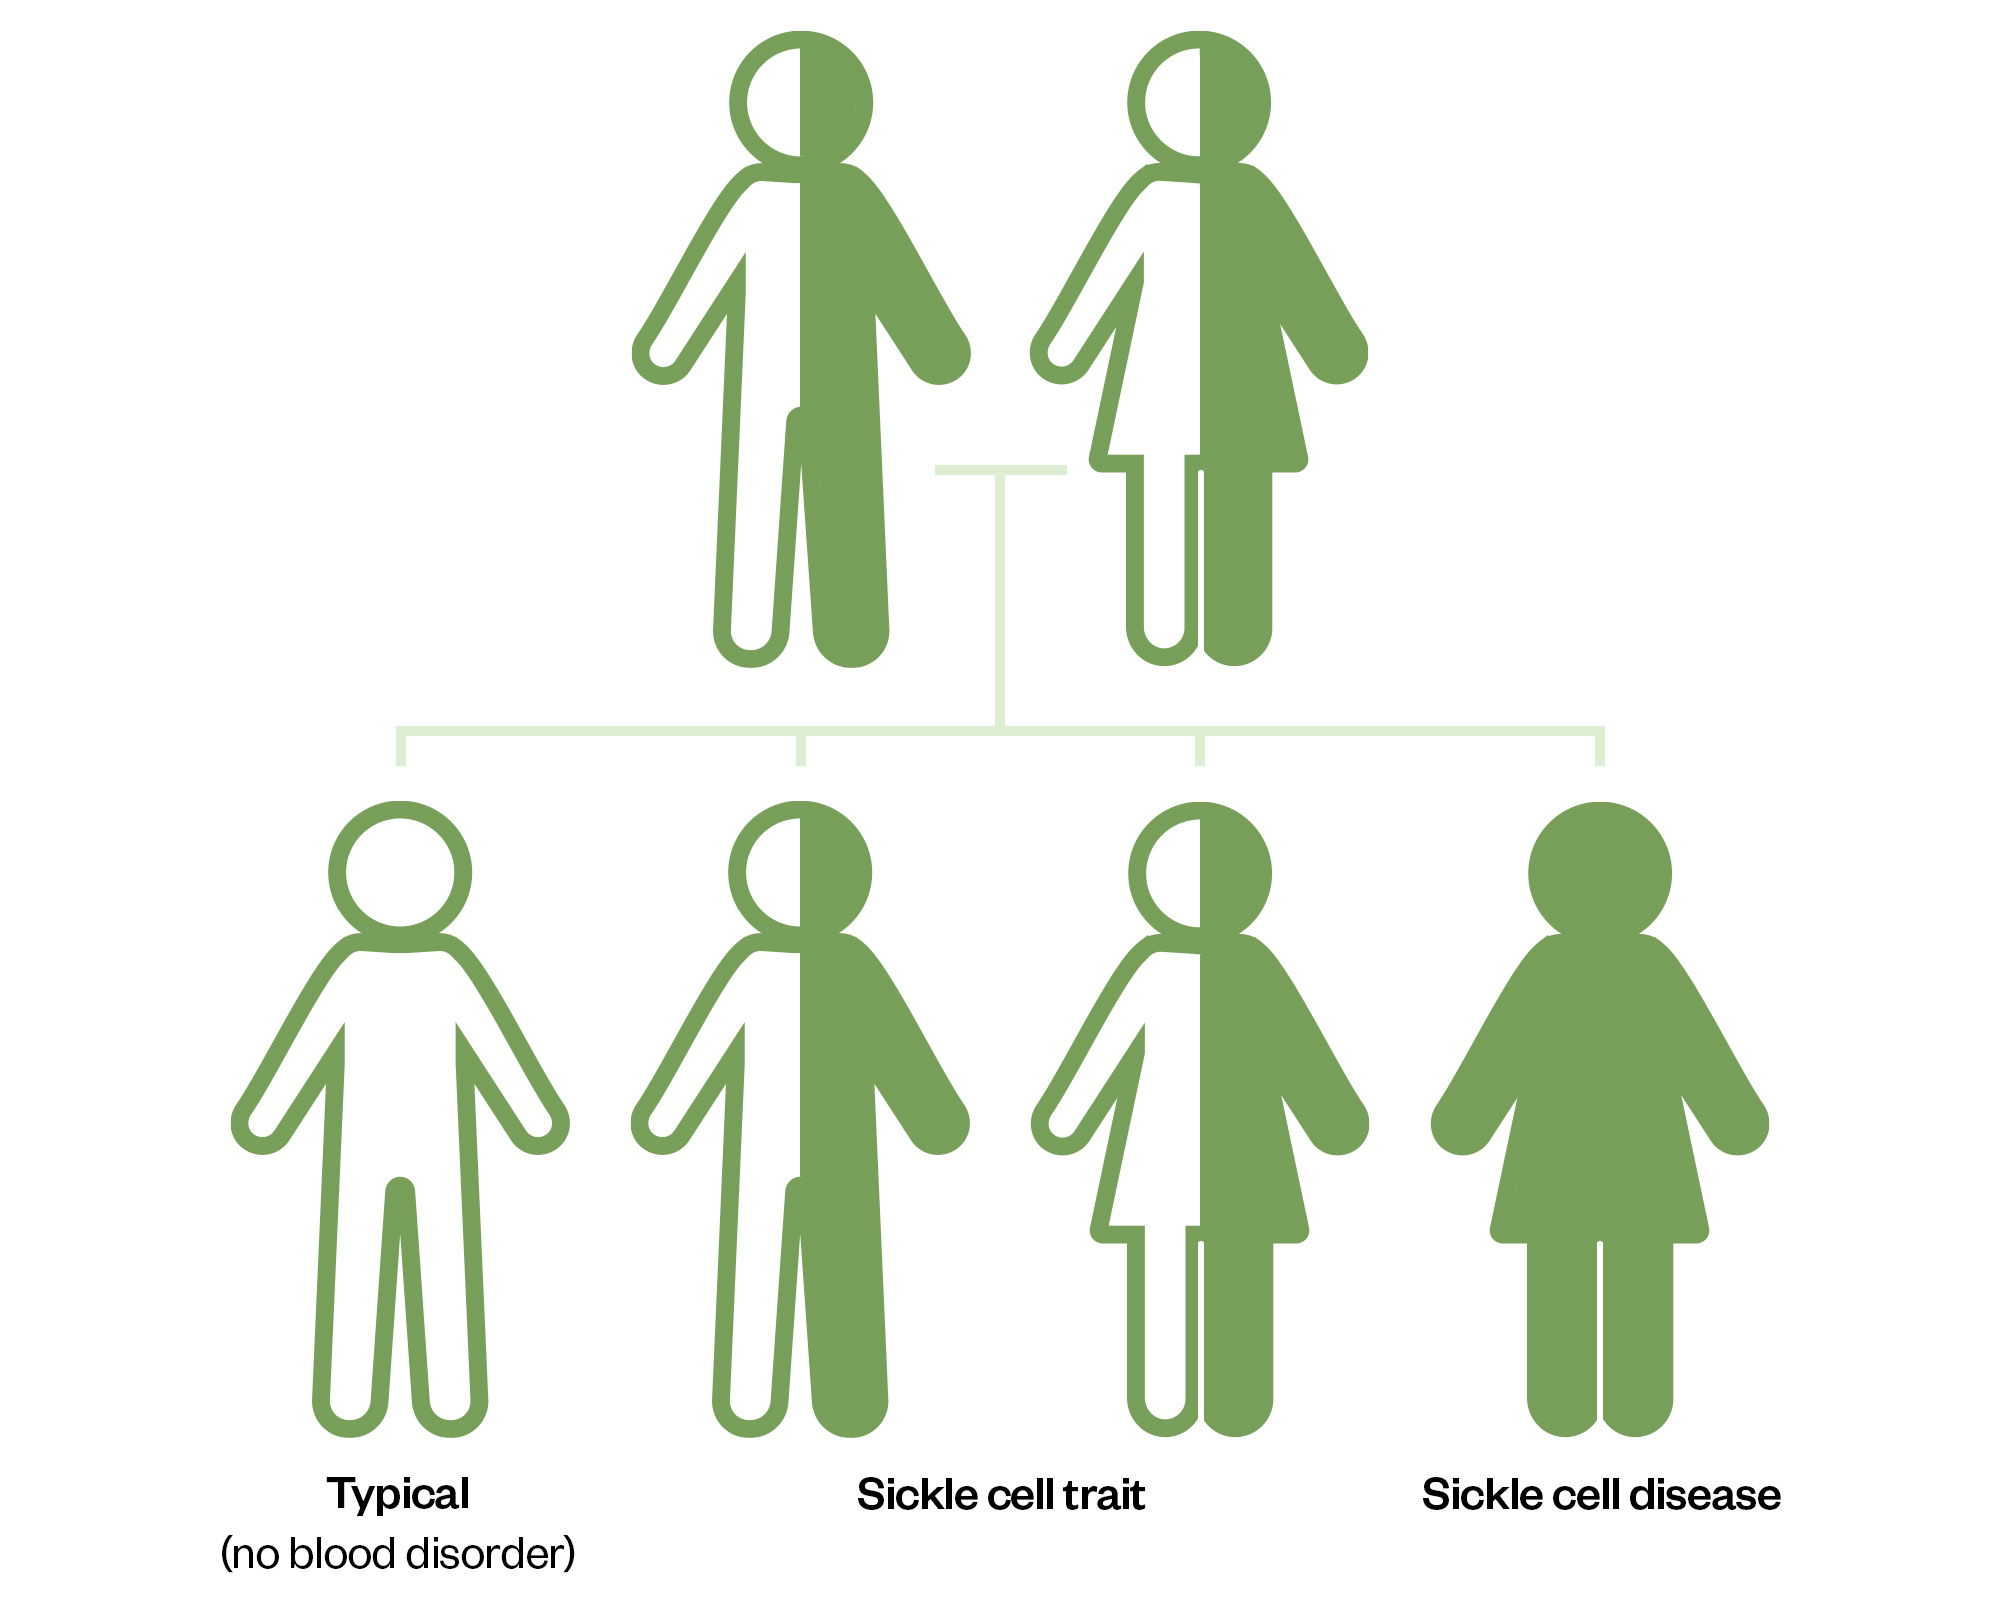 Diagram showing that for two parents with the sickle cell trait, probability is that of four children one would have no blood disorder, two would have the trait and the fourth would have the disease.